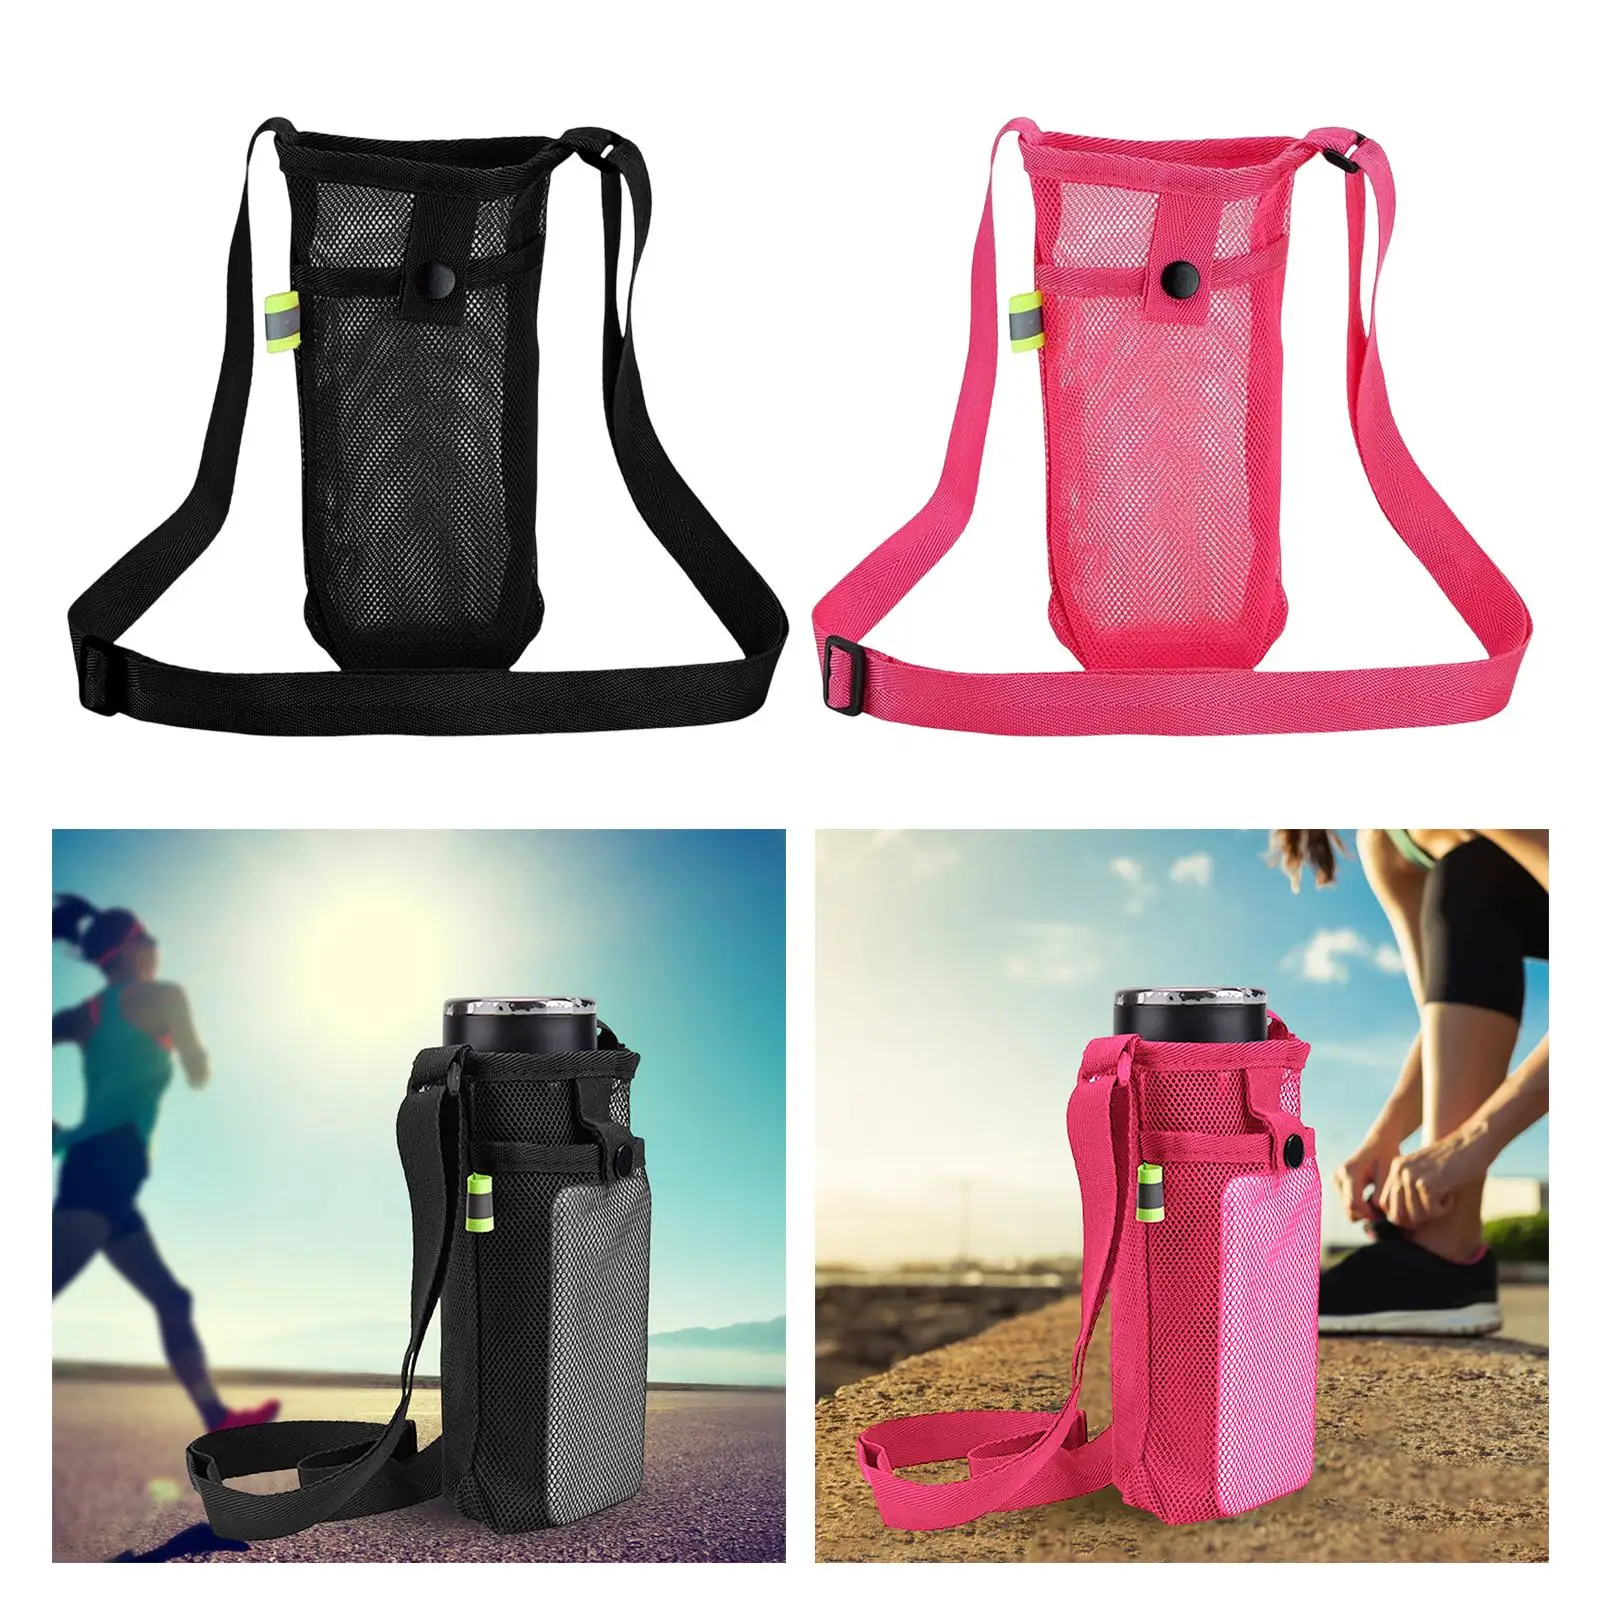 Water Bottle Carrier Bag Kettle Carrying Bag Bottle with Pocket Holder Pouch Sleeve for Outdoor Camping Sports Walking Gym